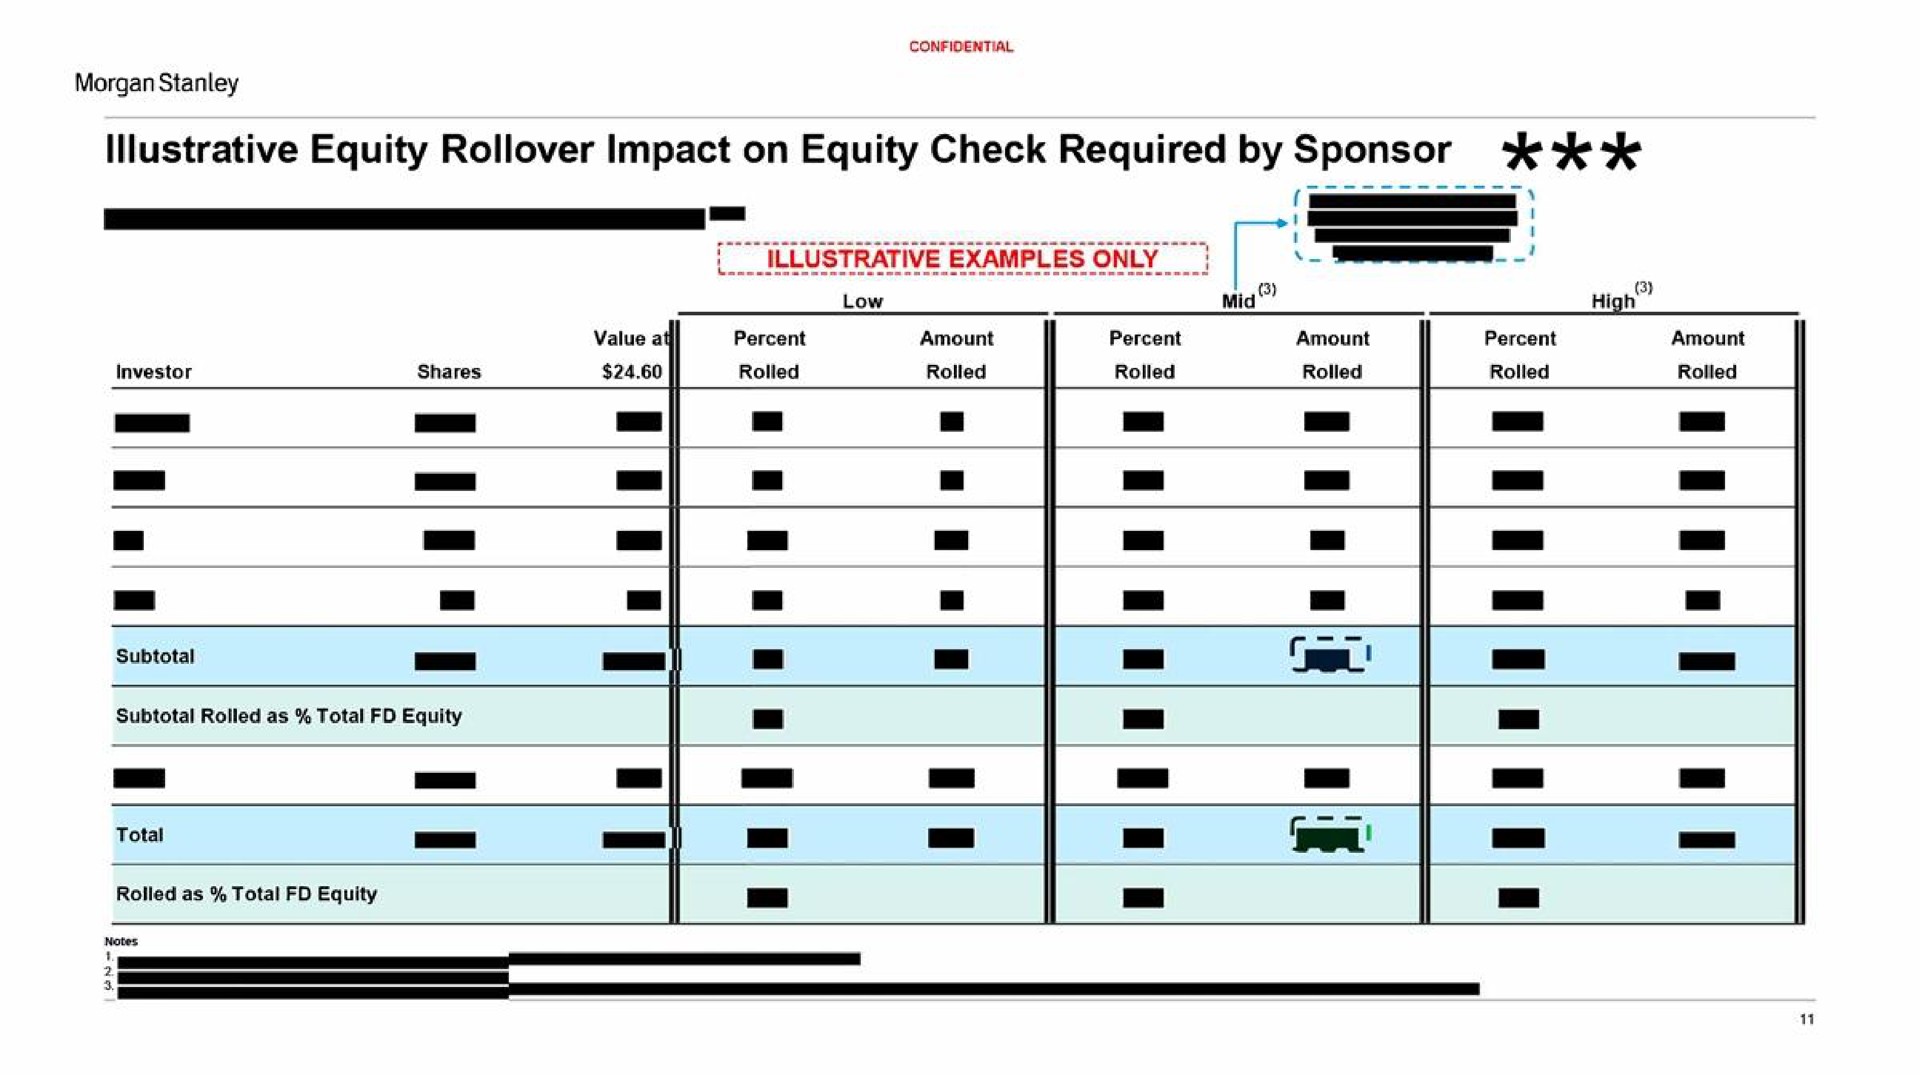 illustrative equity impact on equity check required by sponsor | Morgan Stanley